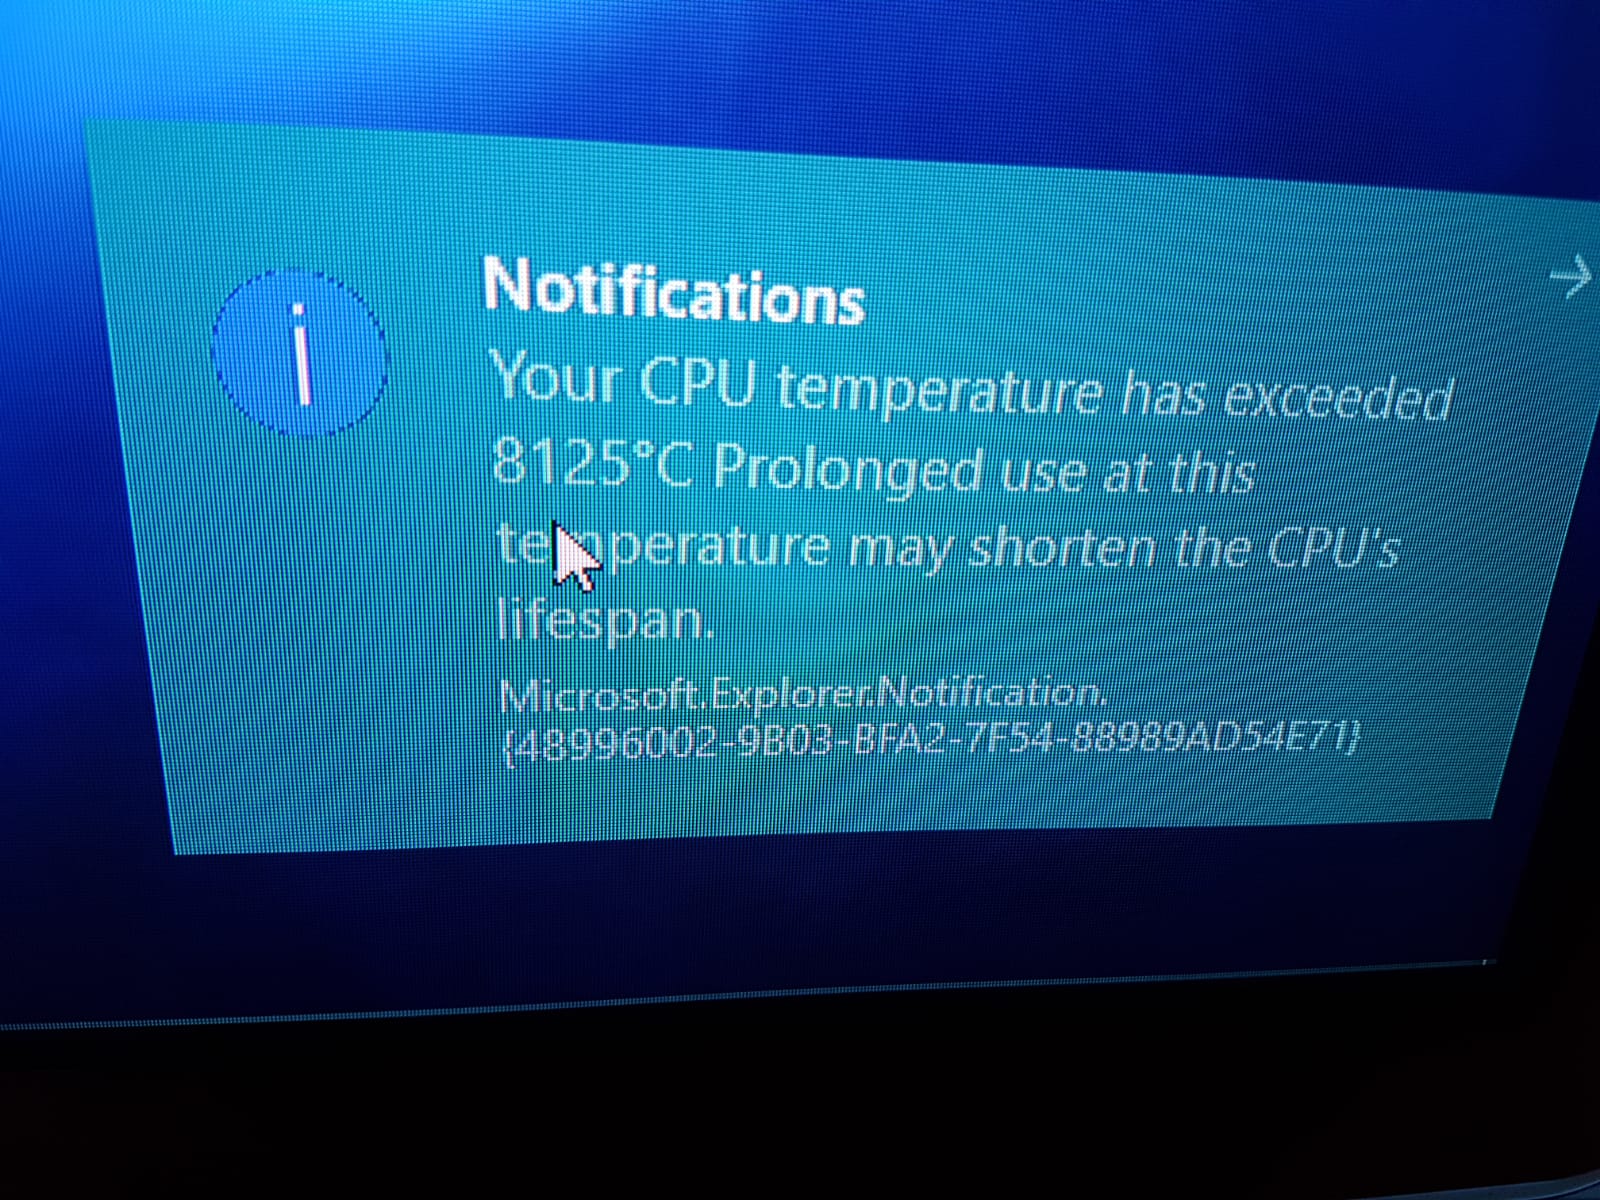 High Quality Your CPU temperature has exceeded 8125 Blank Meme Template